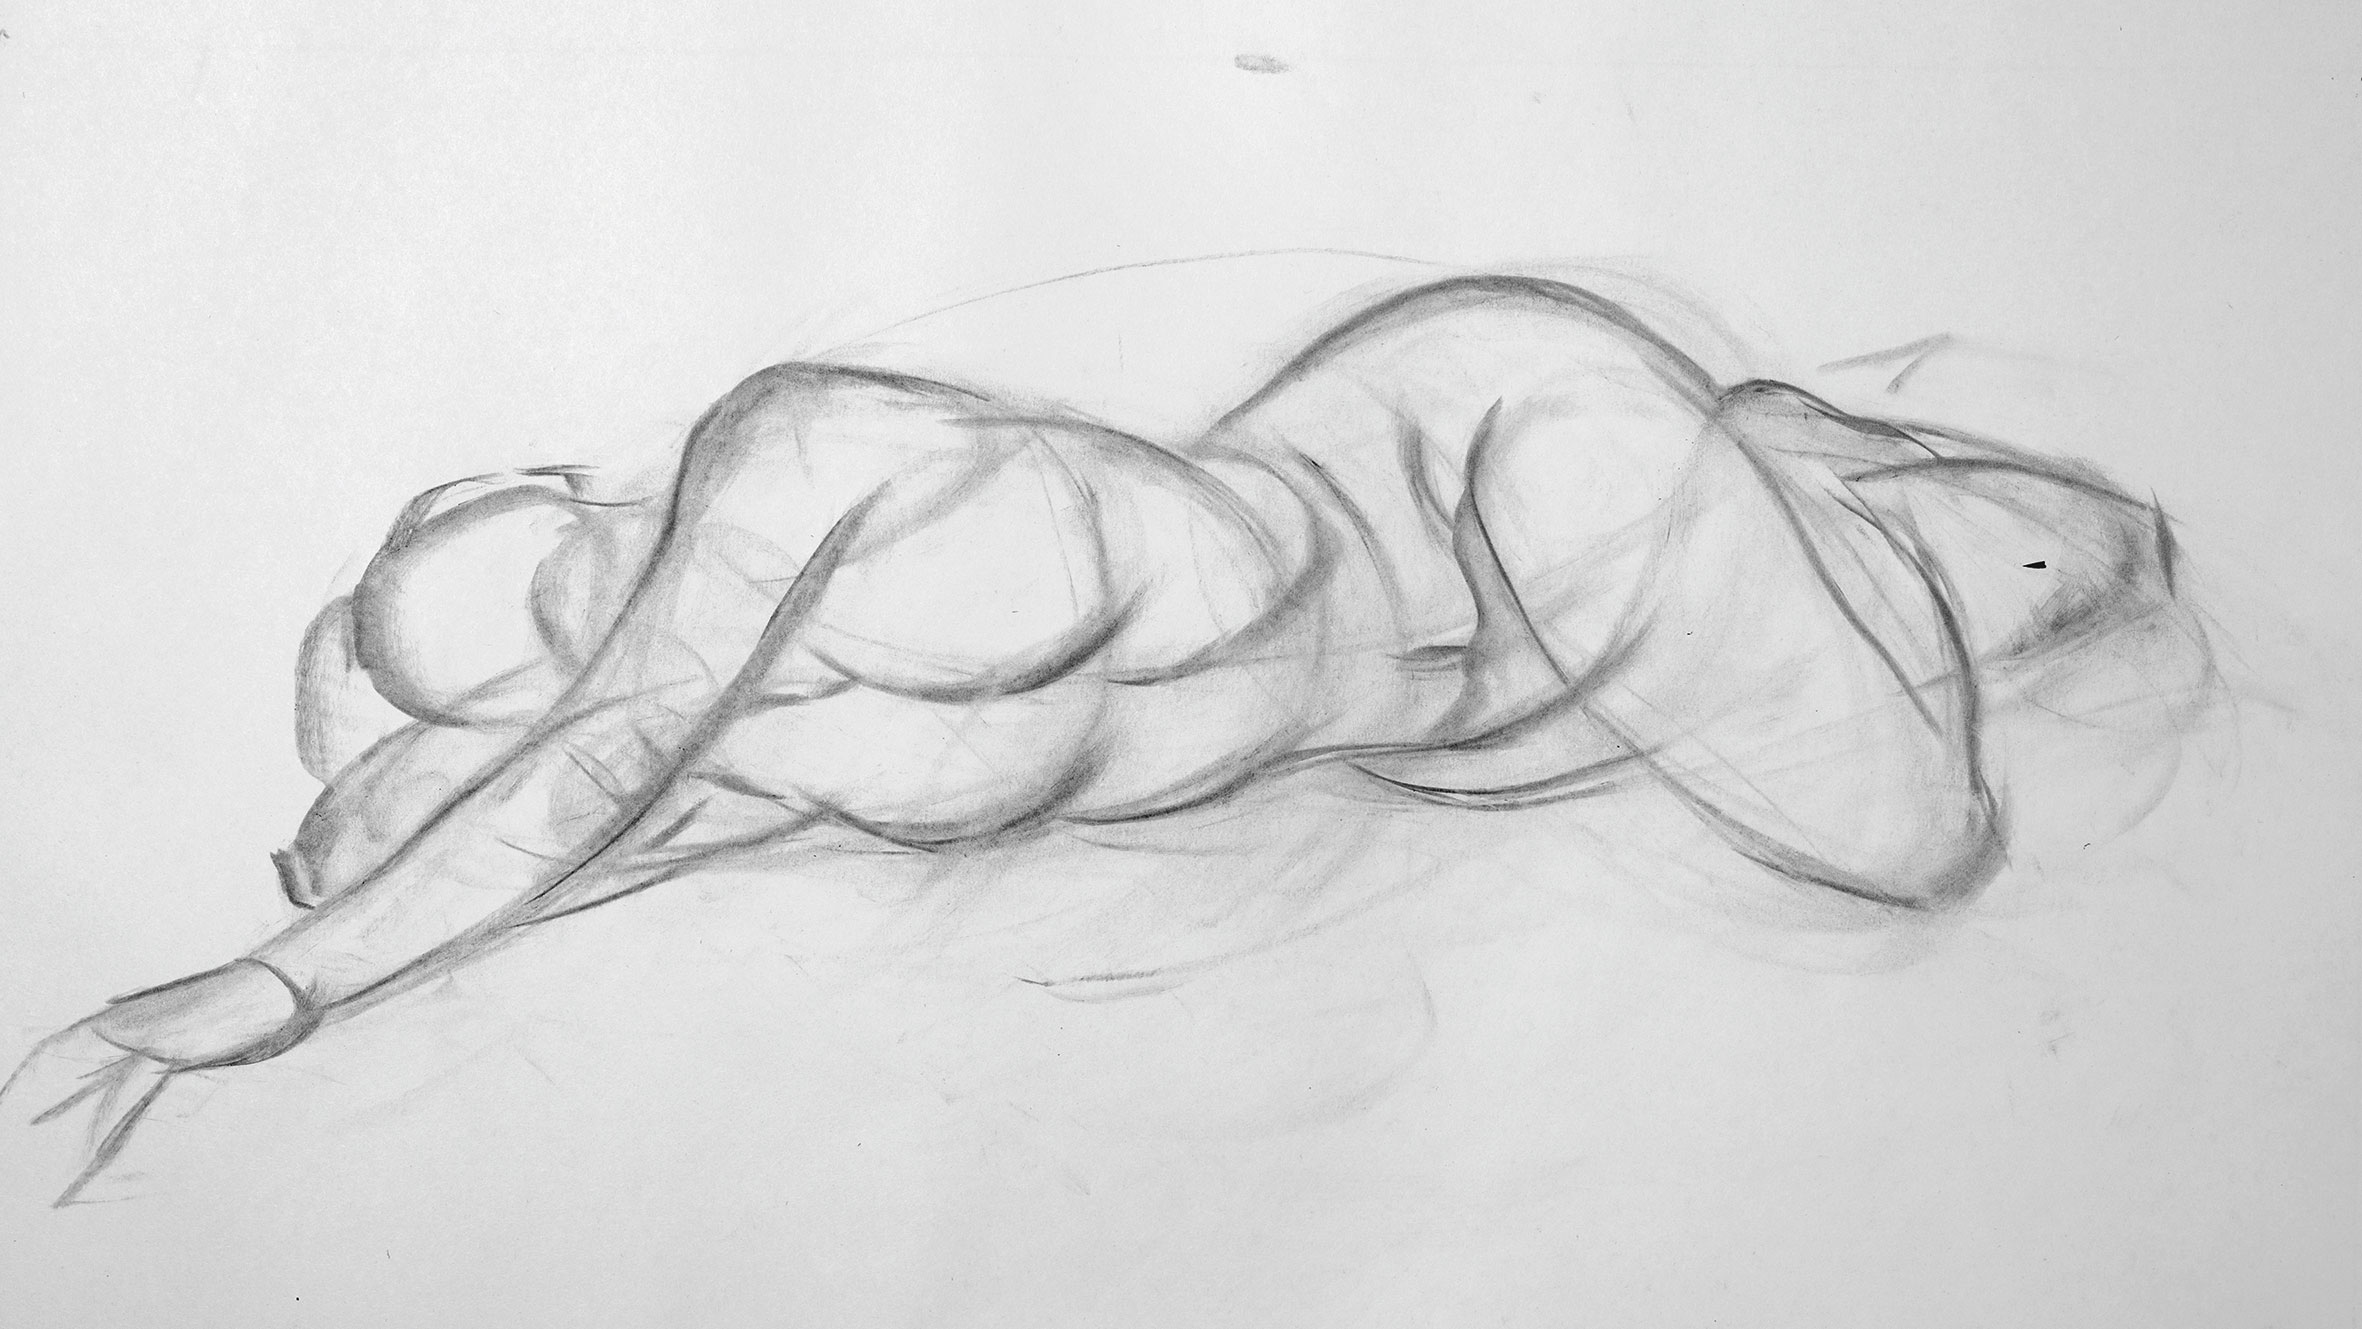 Roughly drawn nude female figure